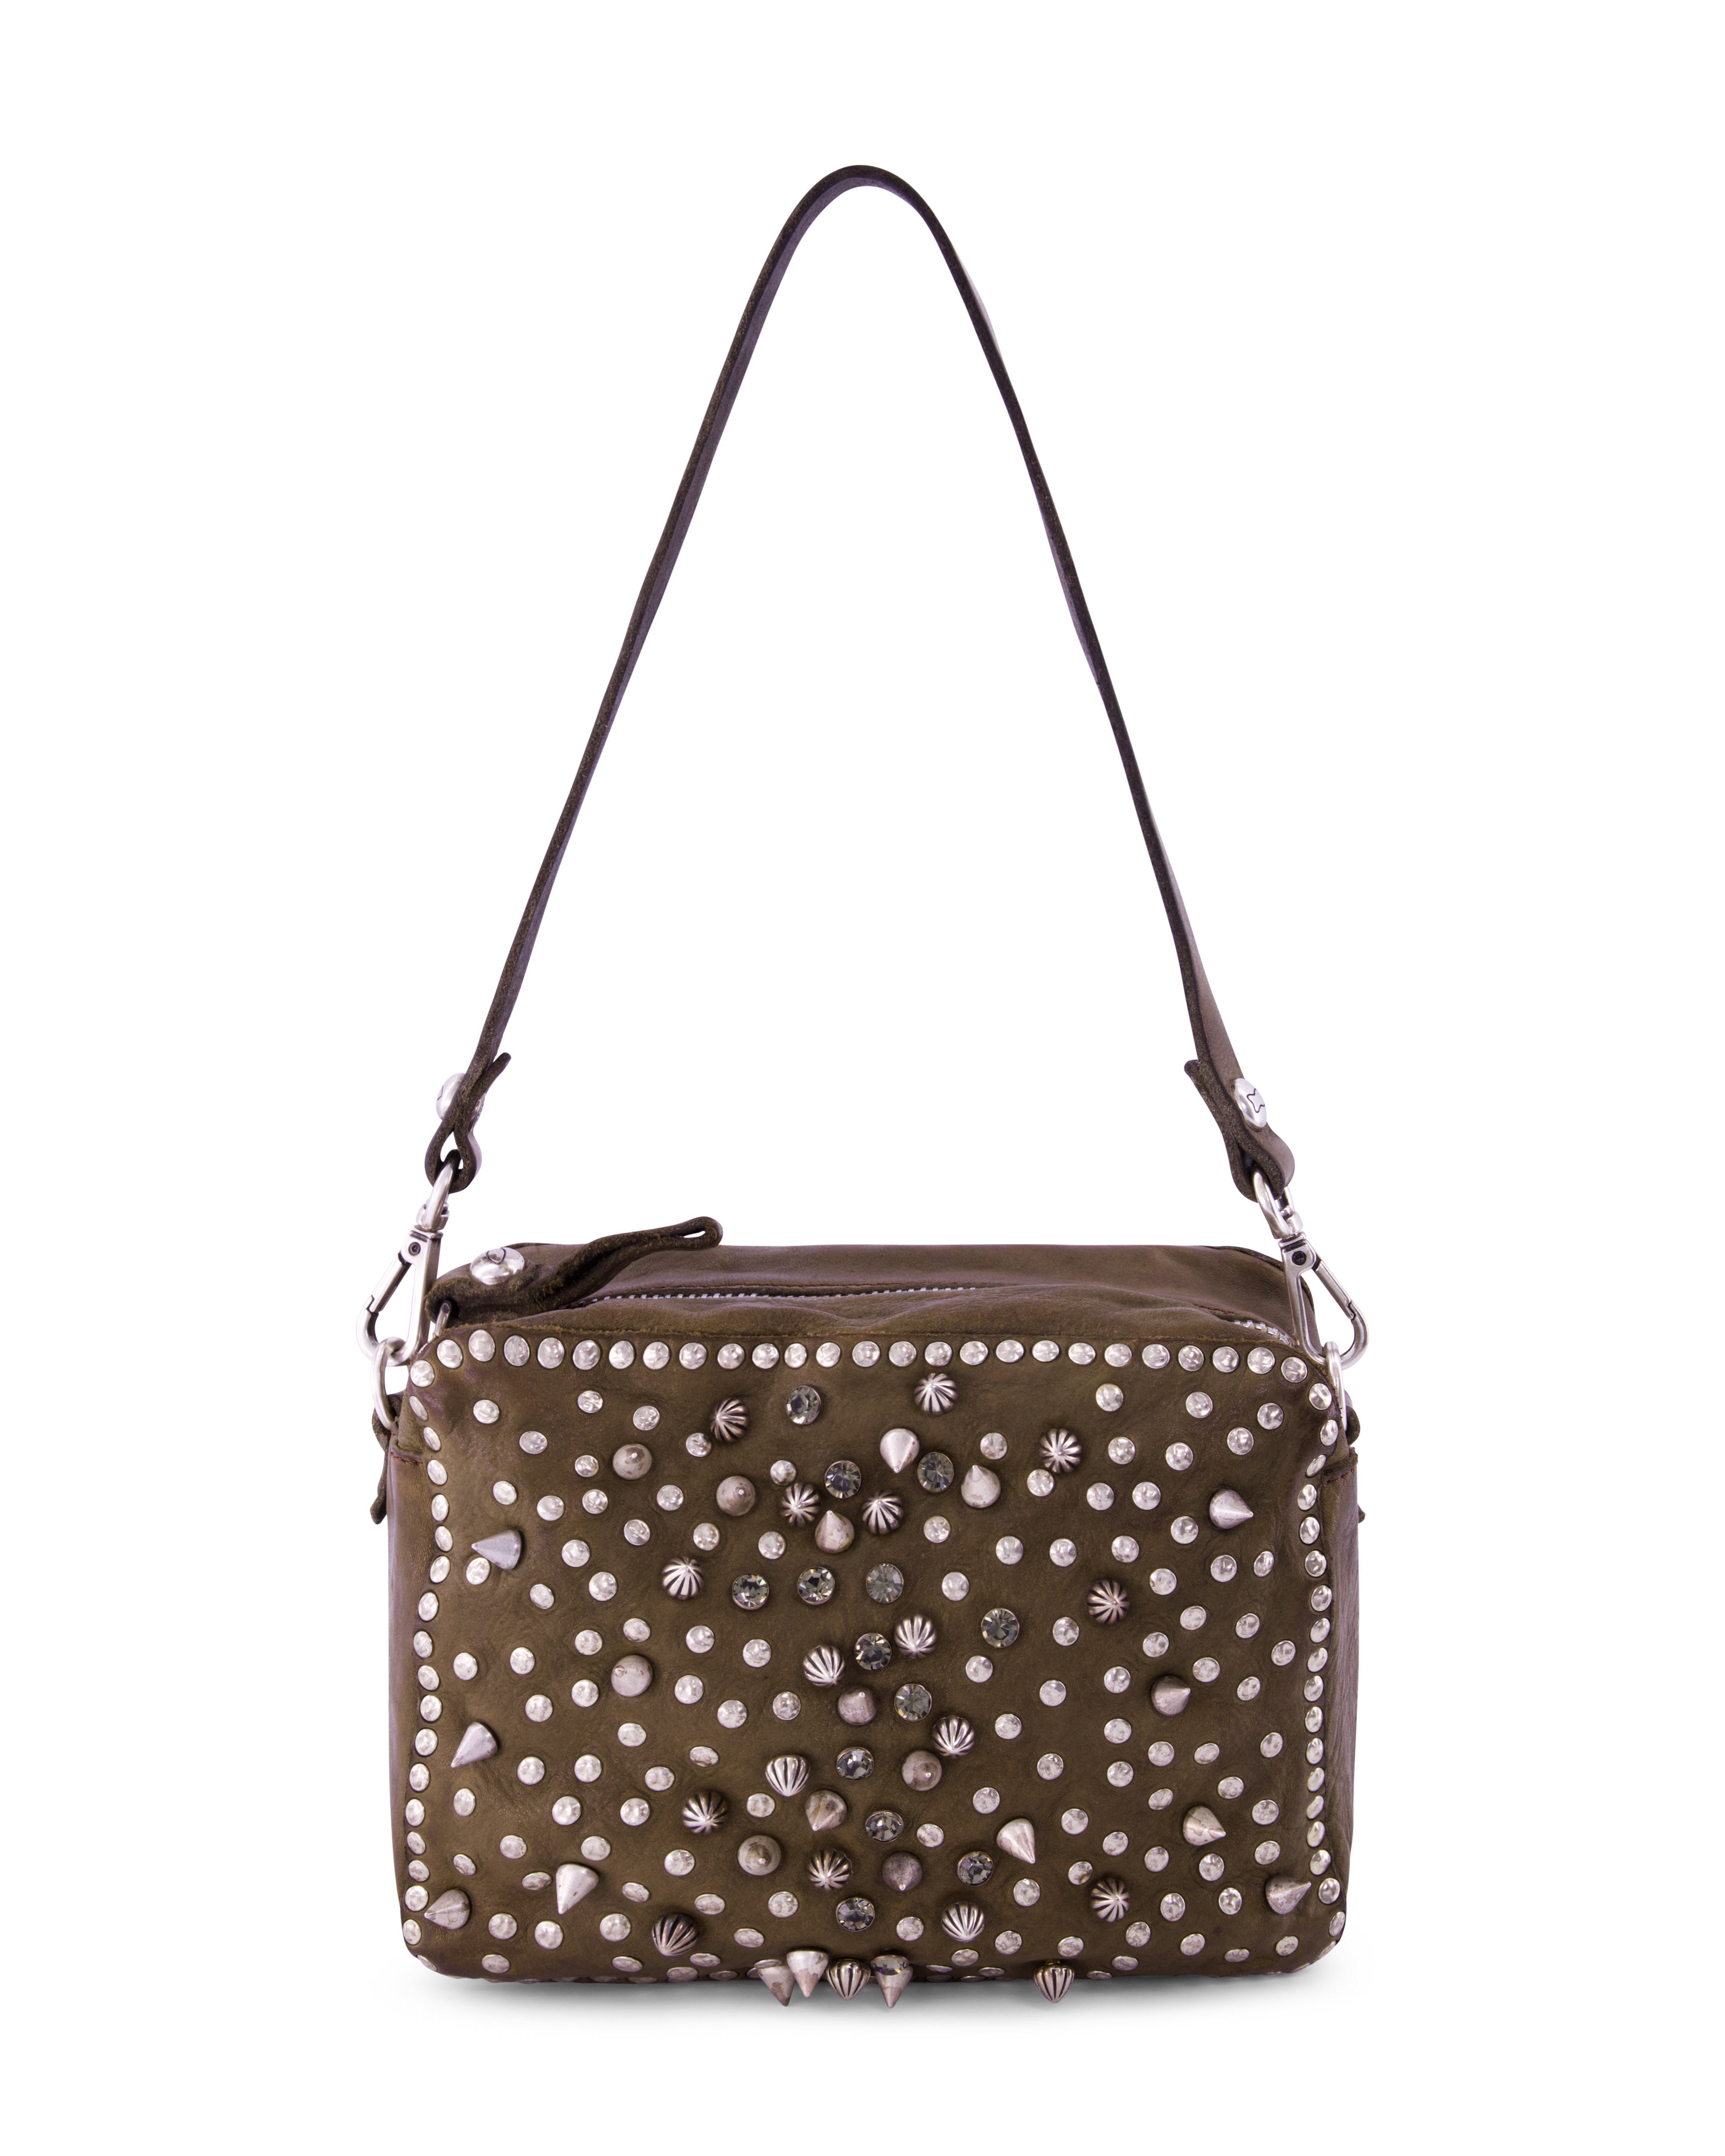 Rock Stud Bowling Bag in Military